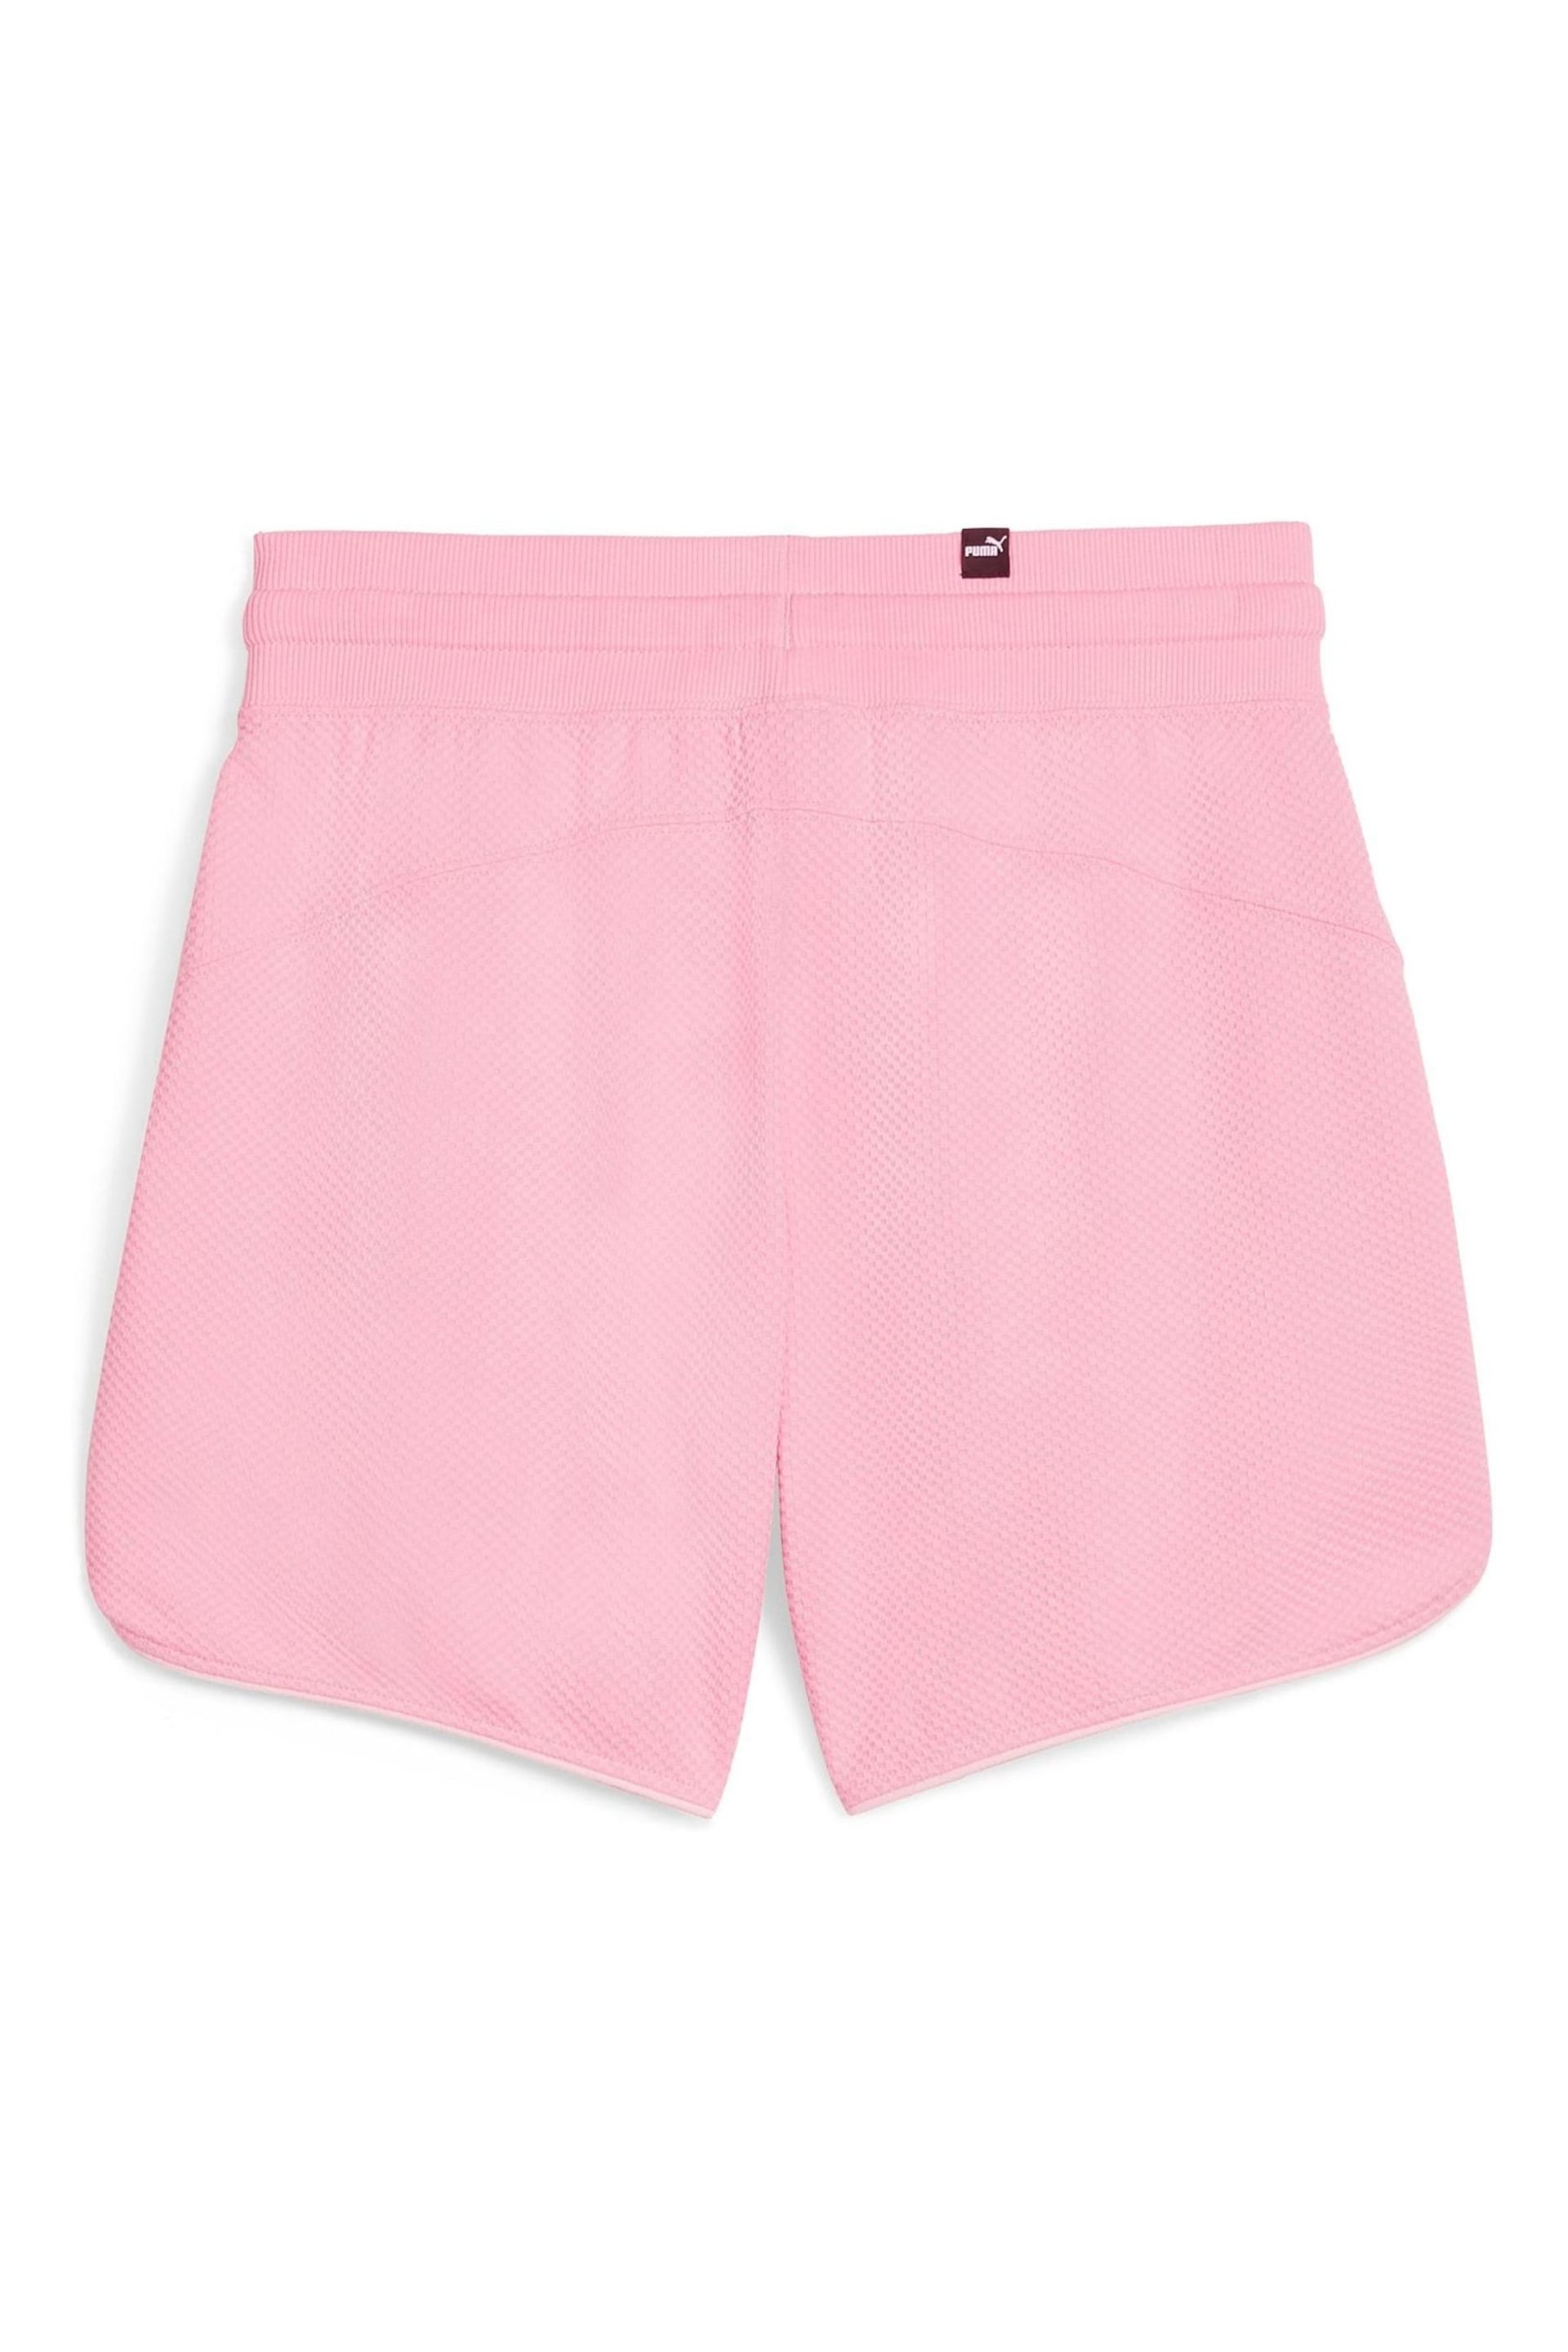 Puma Pink Her Womens Shorts - Image 7 of 7